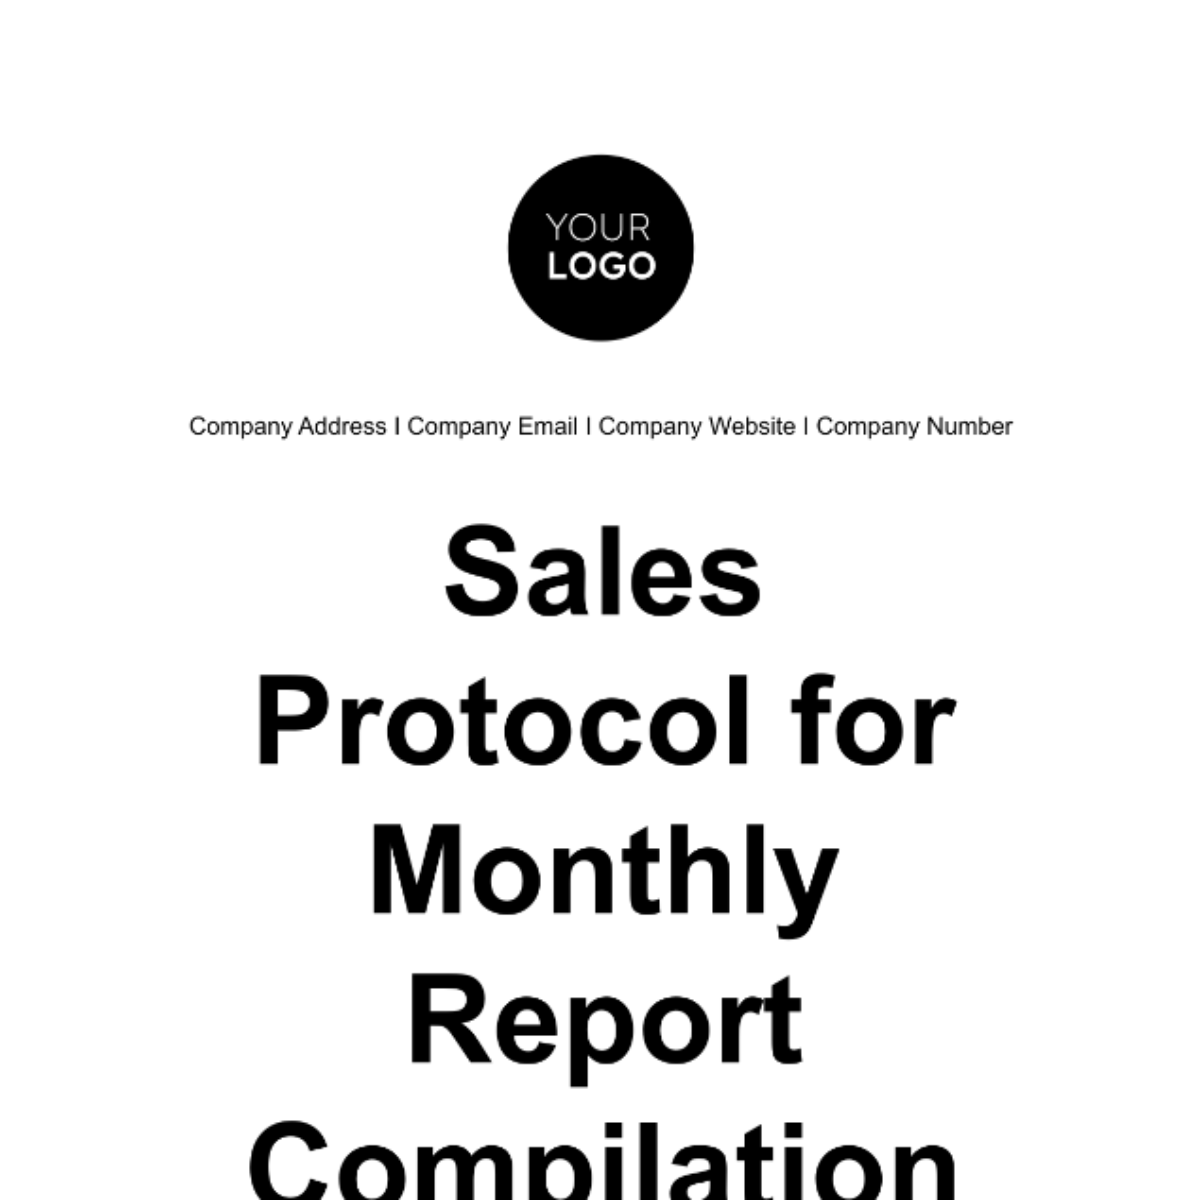 Sales Protocol for Monthly Report Compilation Template